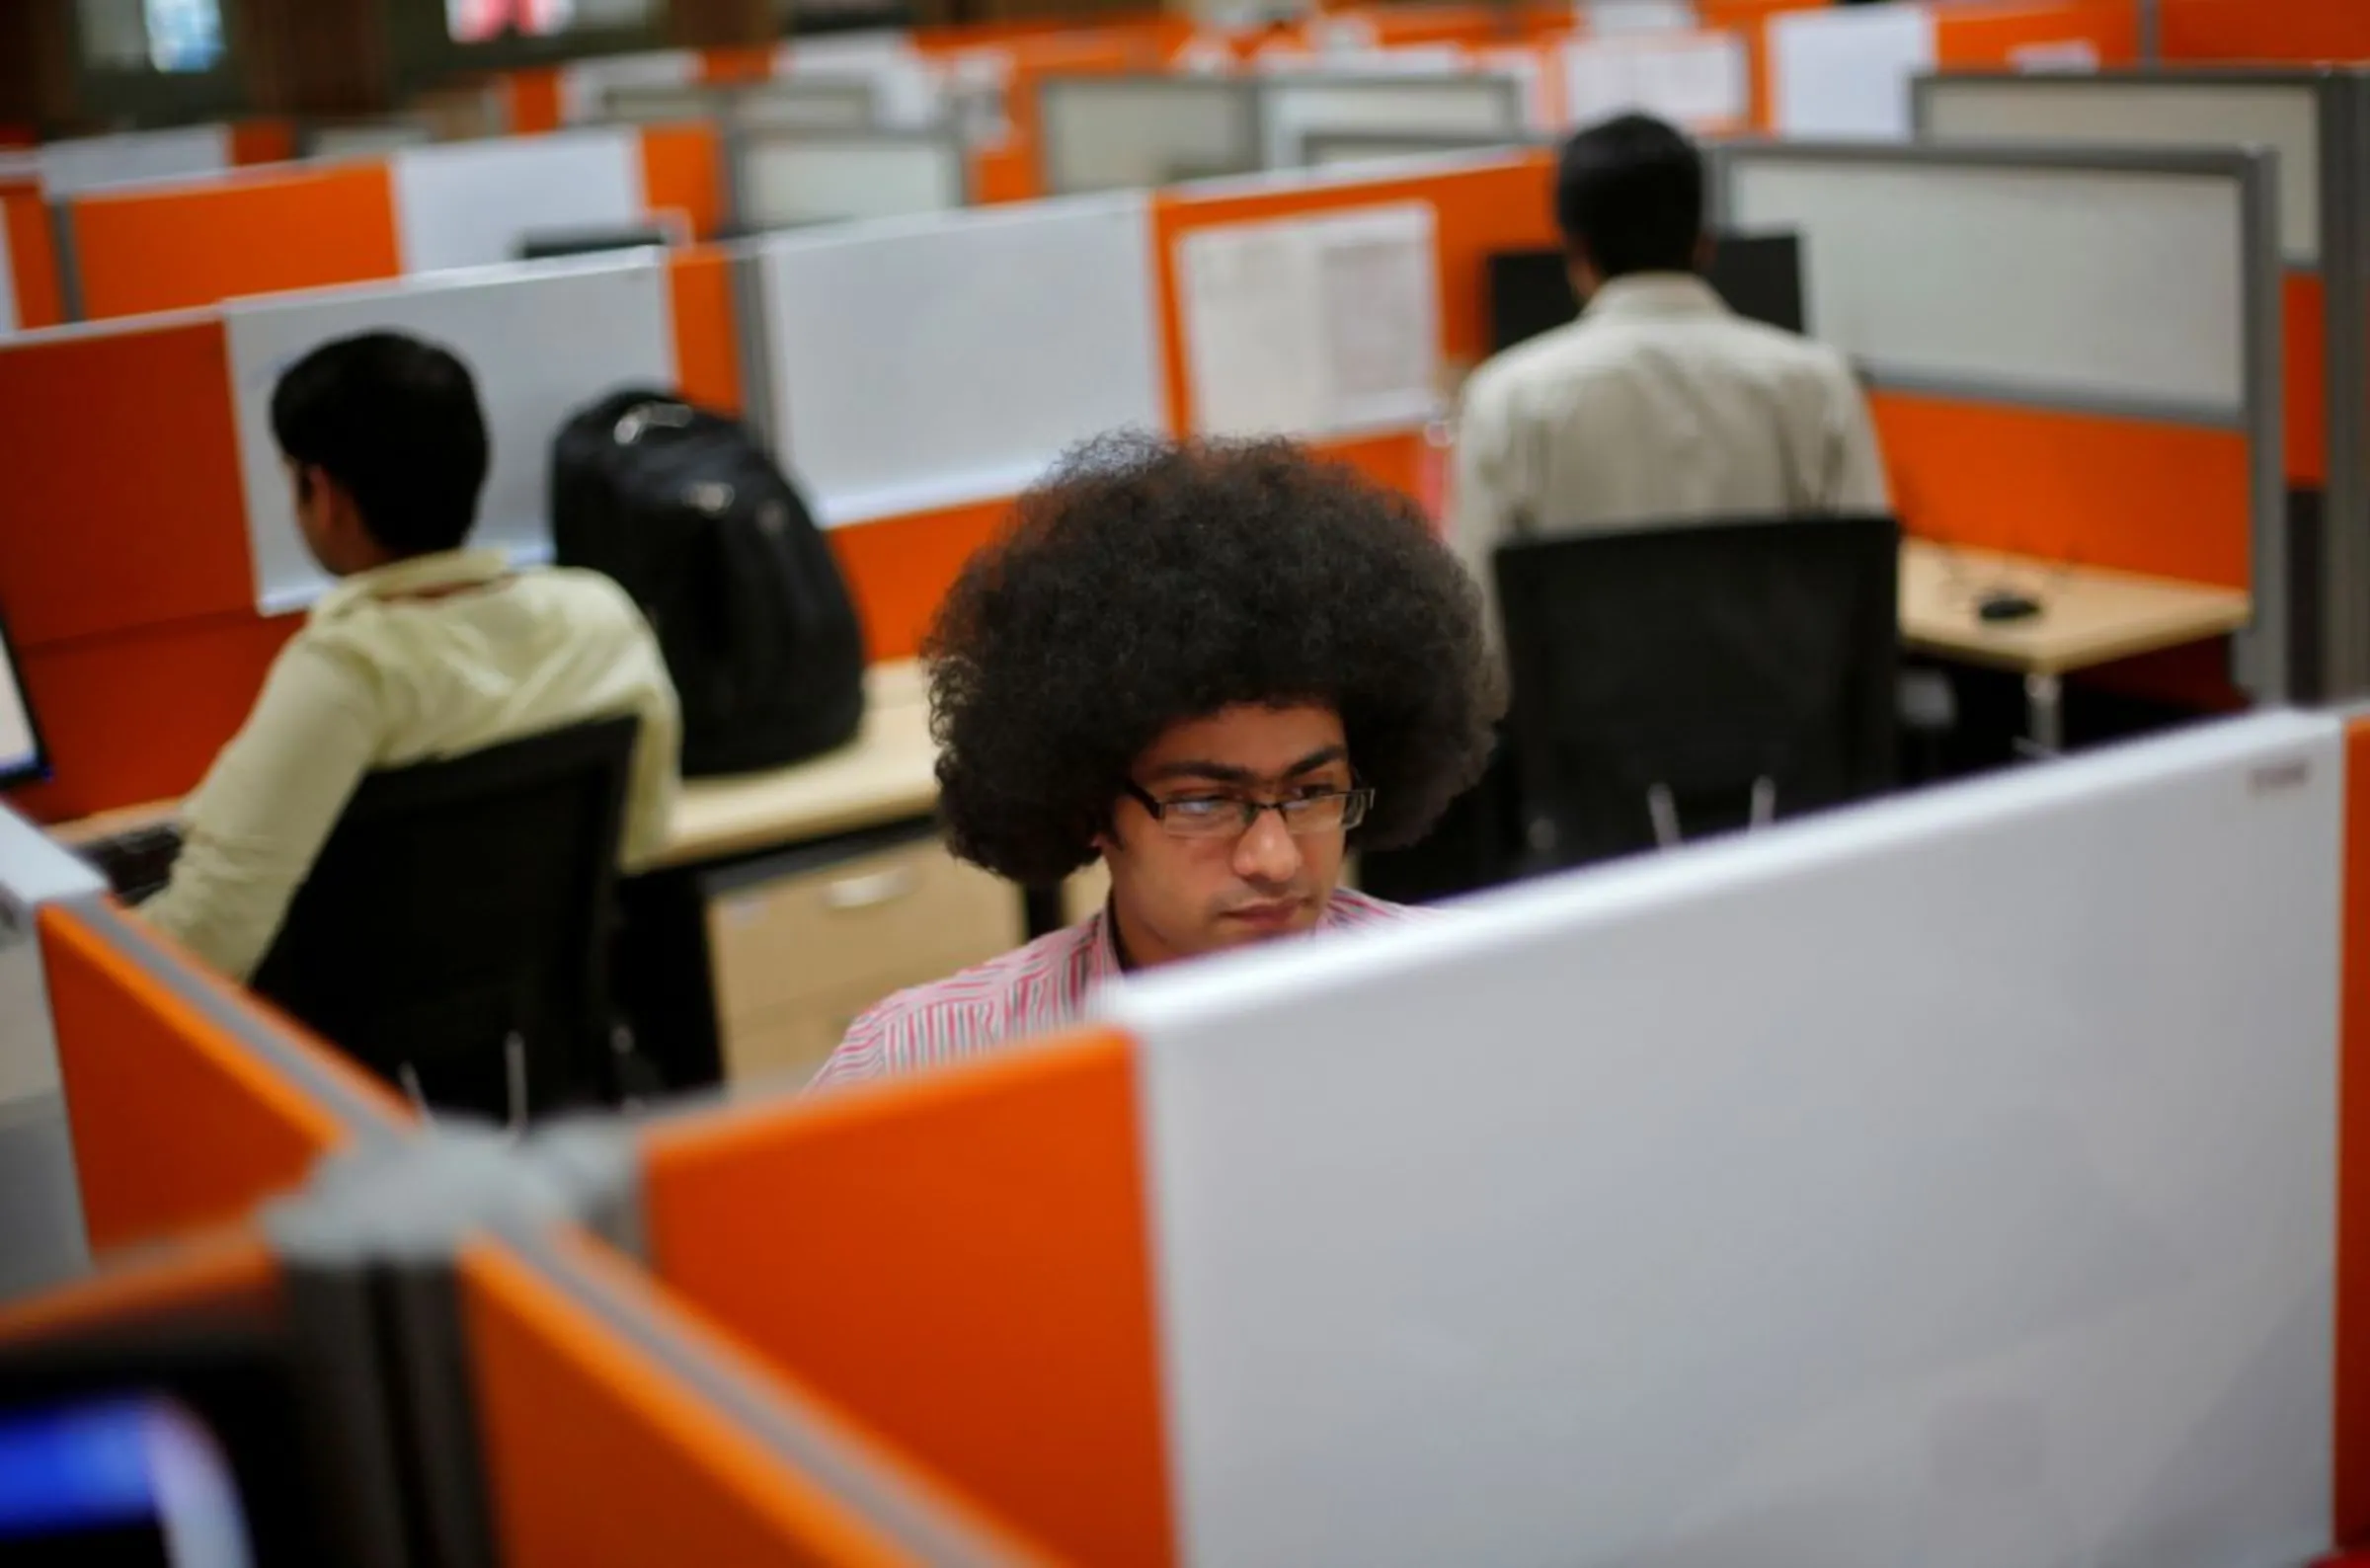 Employees work at their desks inside Tech Mahindra office building in Noida on the outskirts of New Delhi March 18, 2013. REUTERS/Adnan Abidi